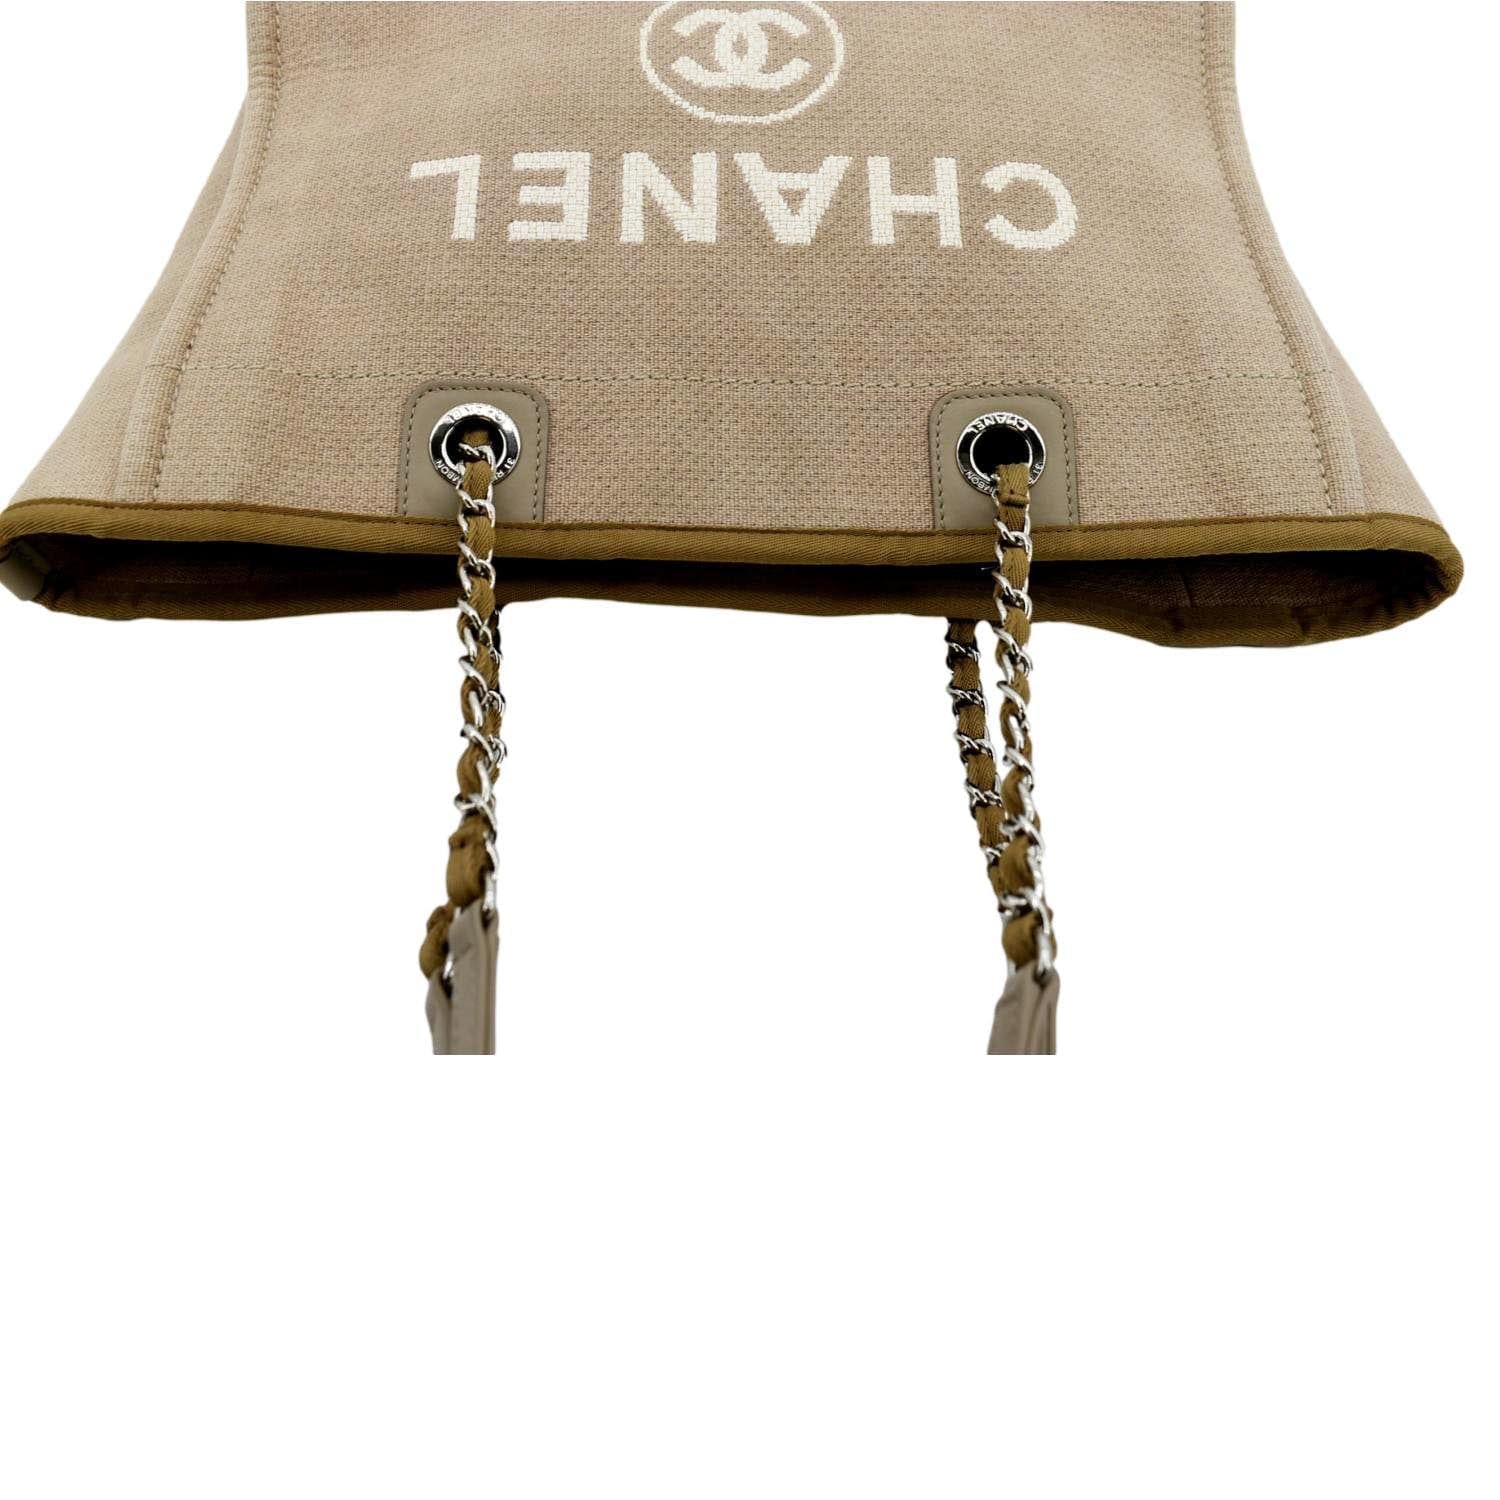 Chanel Beige Canvas Deauville Tote at 1stDibs  chanel beige tote, chanel  tote bag canvas, chanel cambon tote